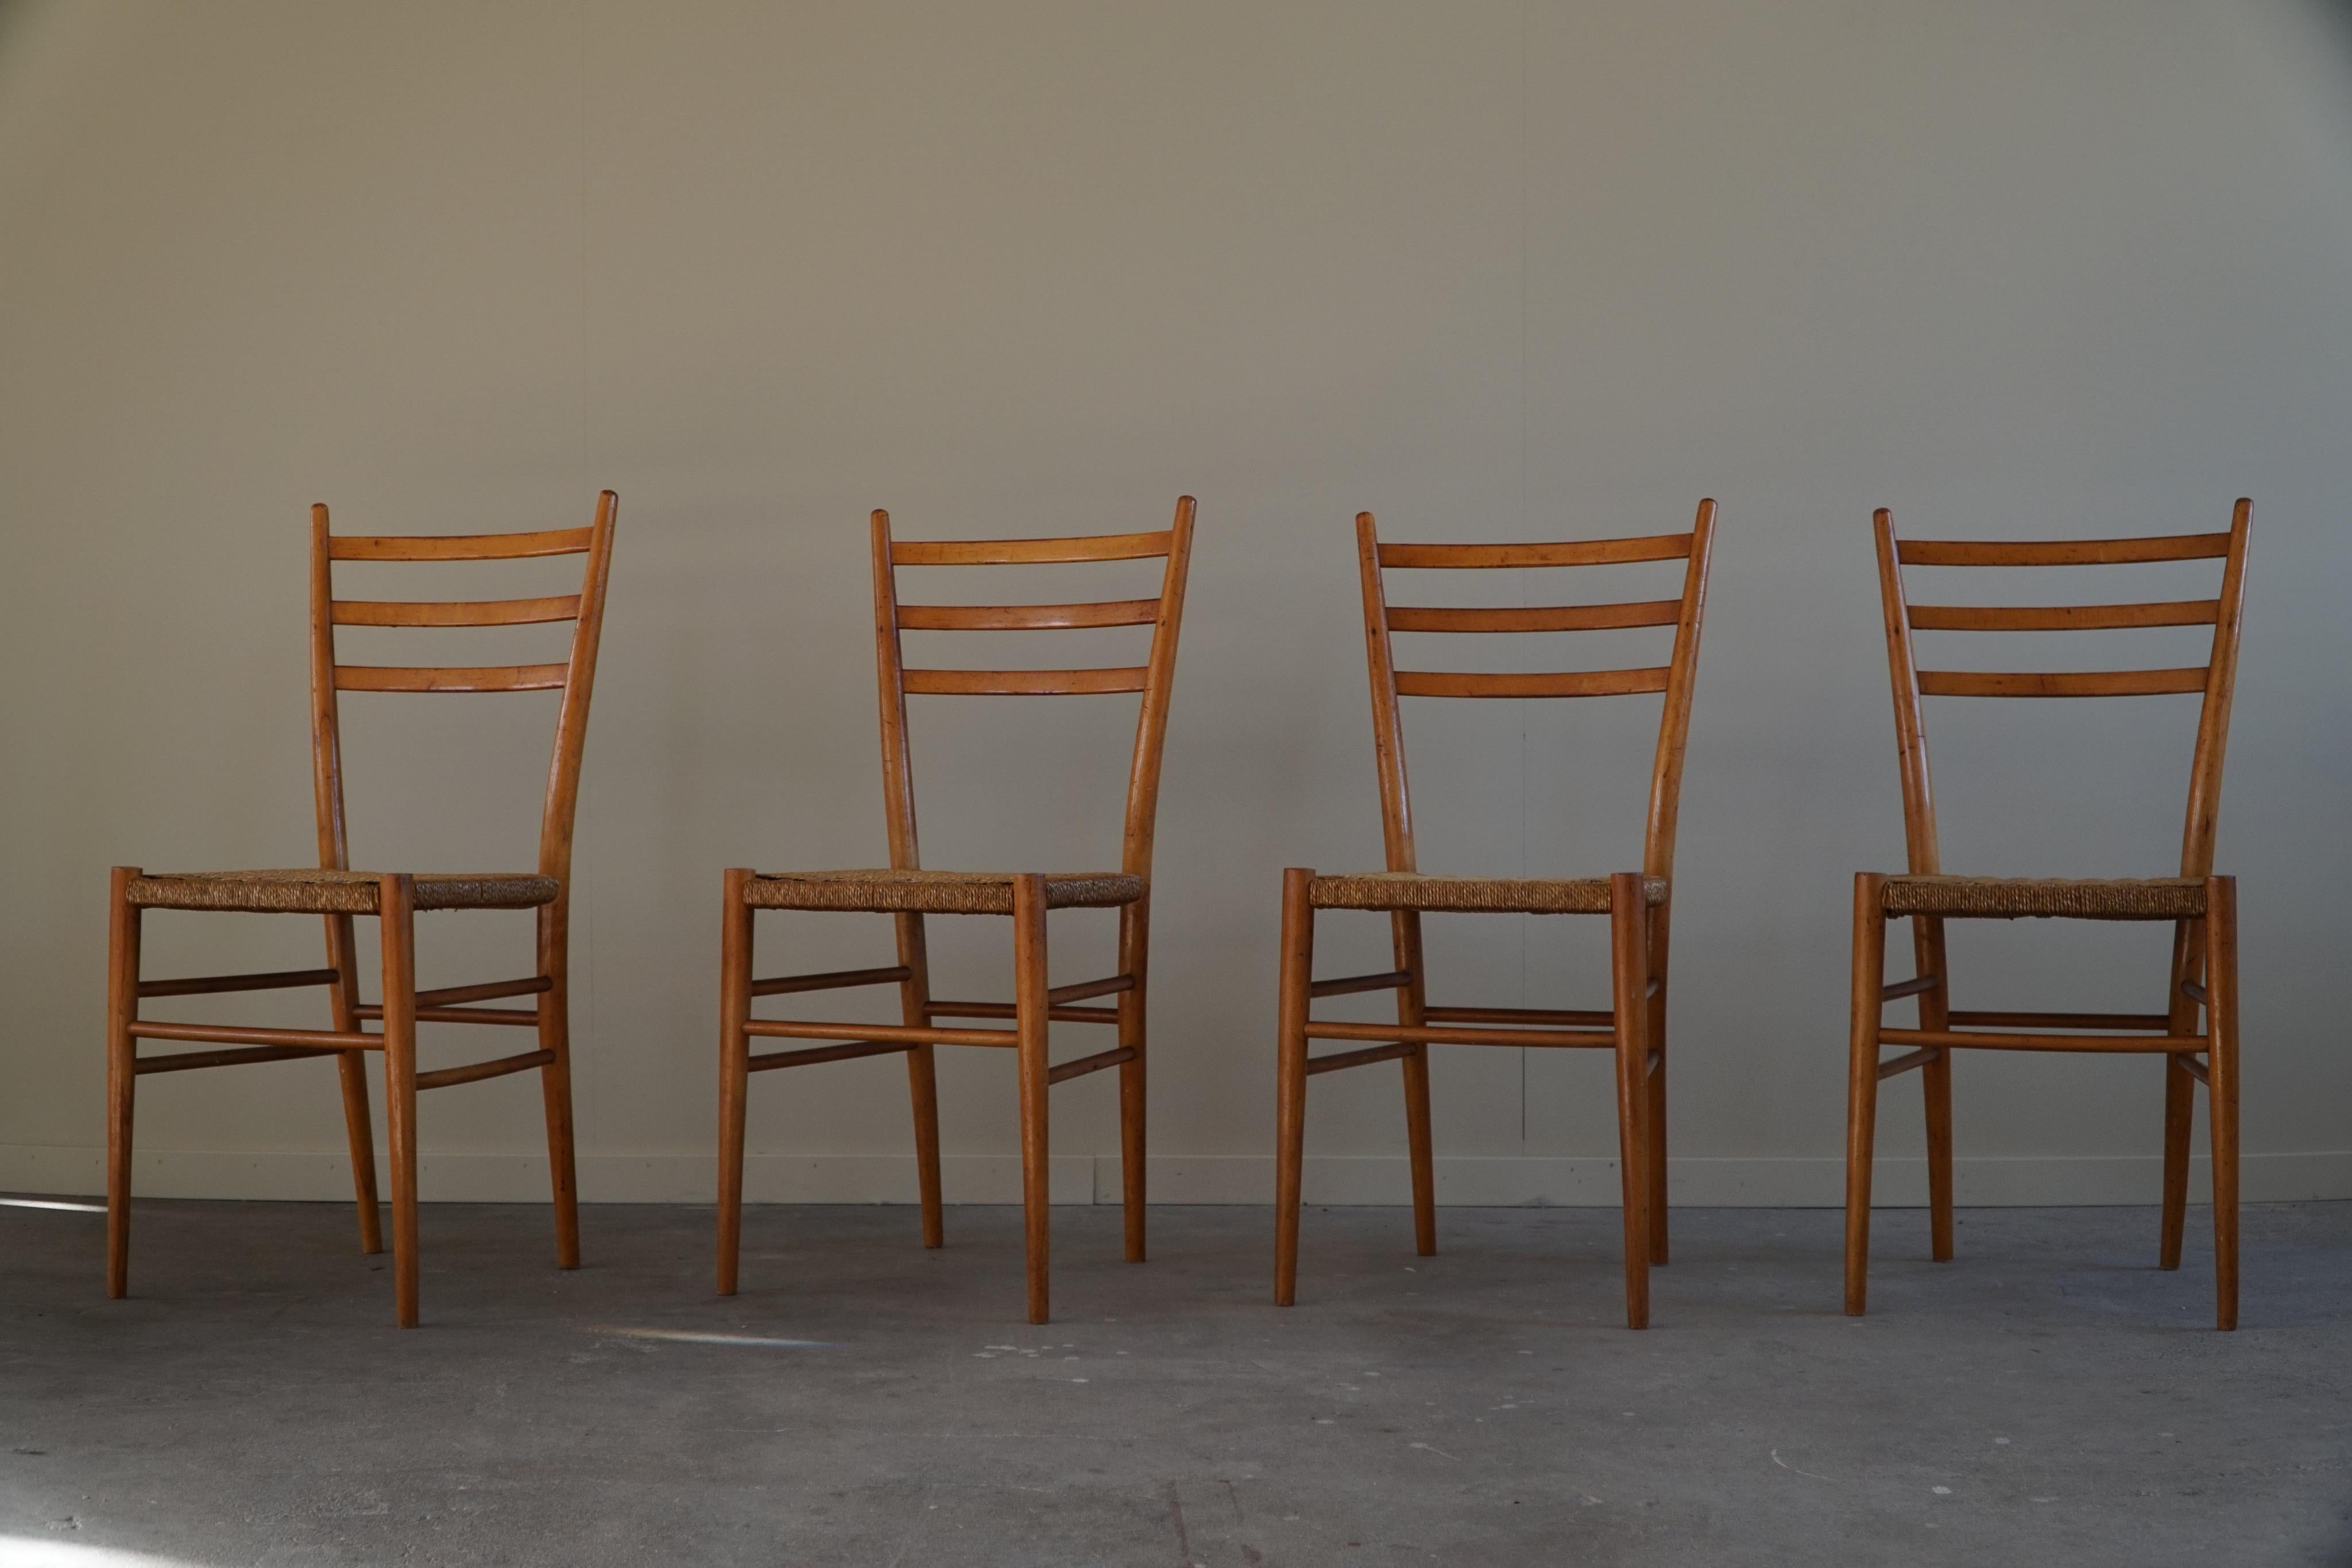 20th Century Gio Ponit, 4 x Italian Modern Dining Chairs in Solid Beech and Wicker, 1960s